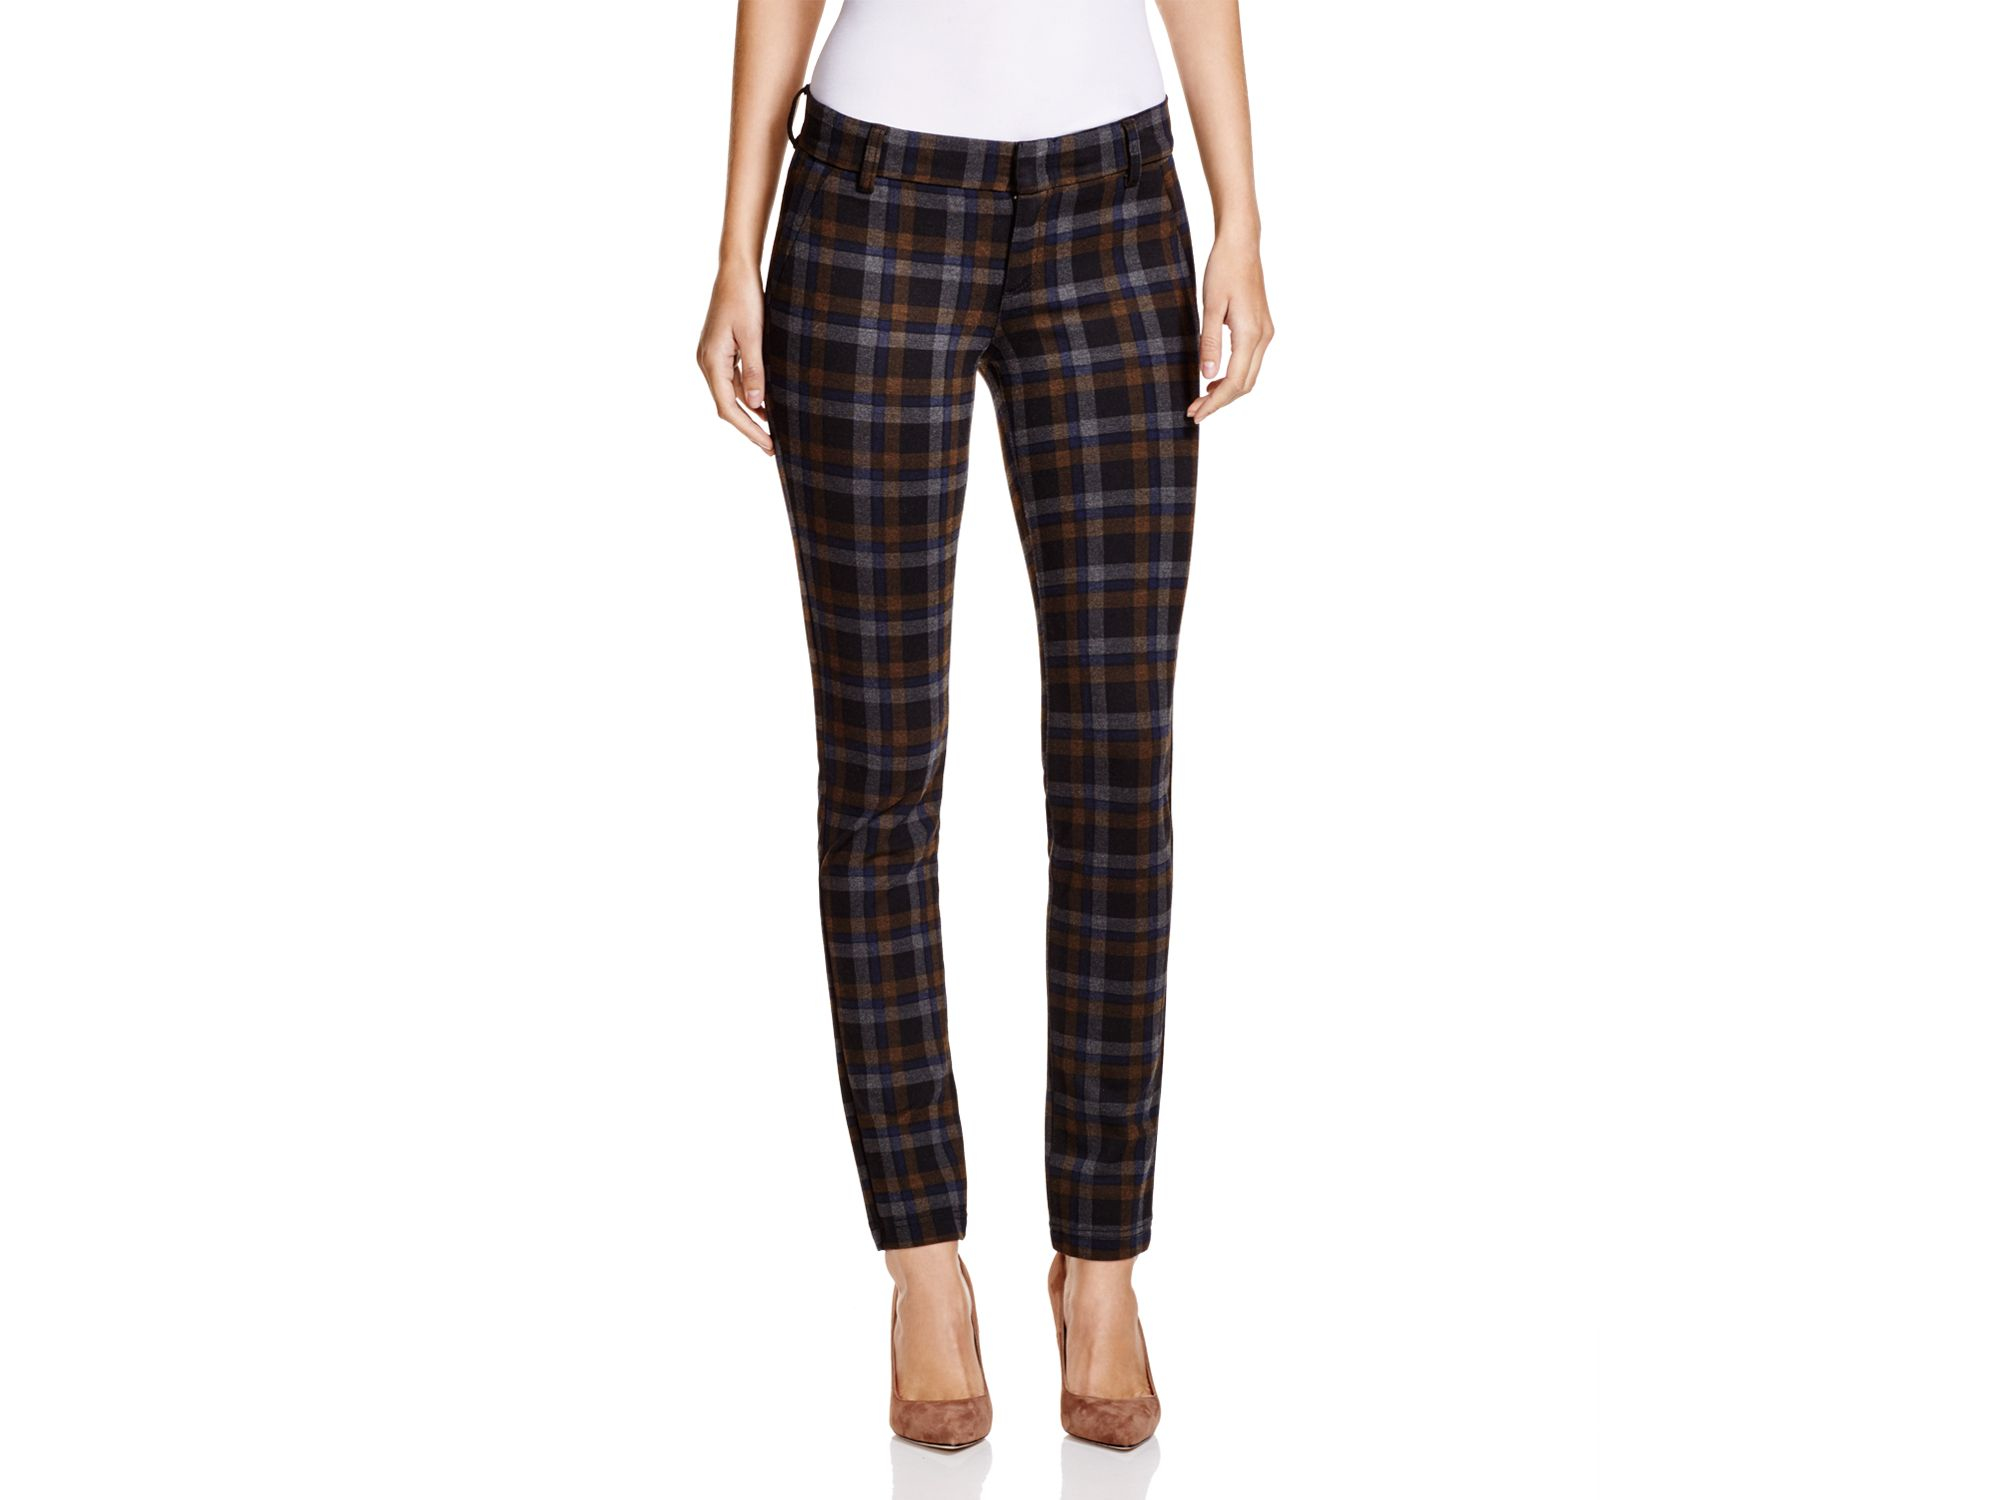 Kut from the kloth Diana Plaid Skinny Pants in Brown | Lyst